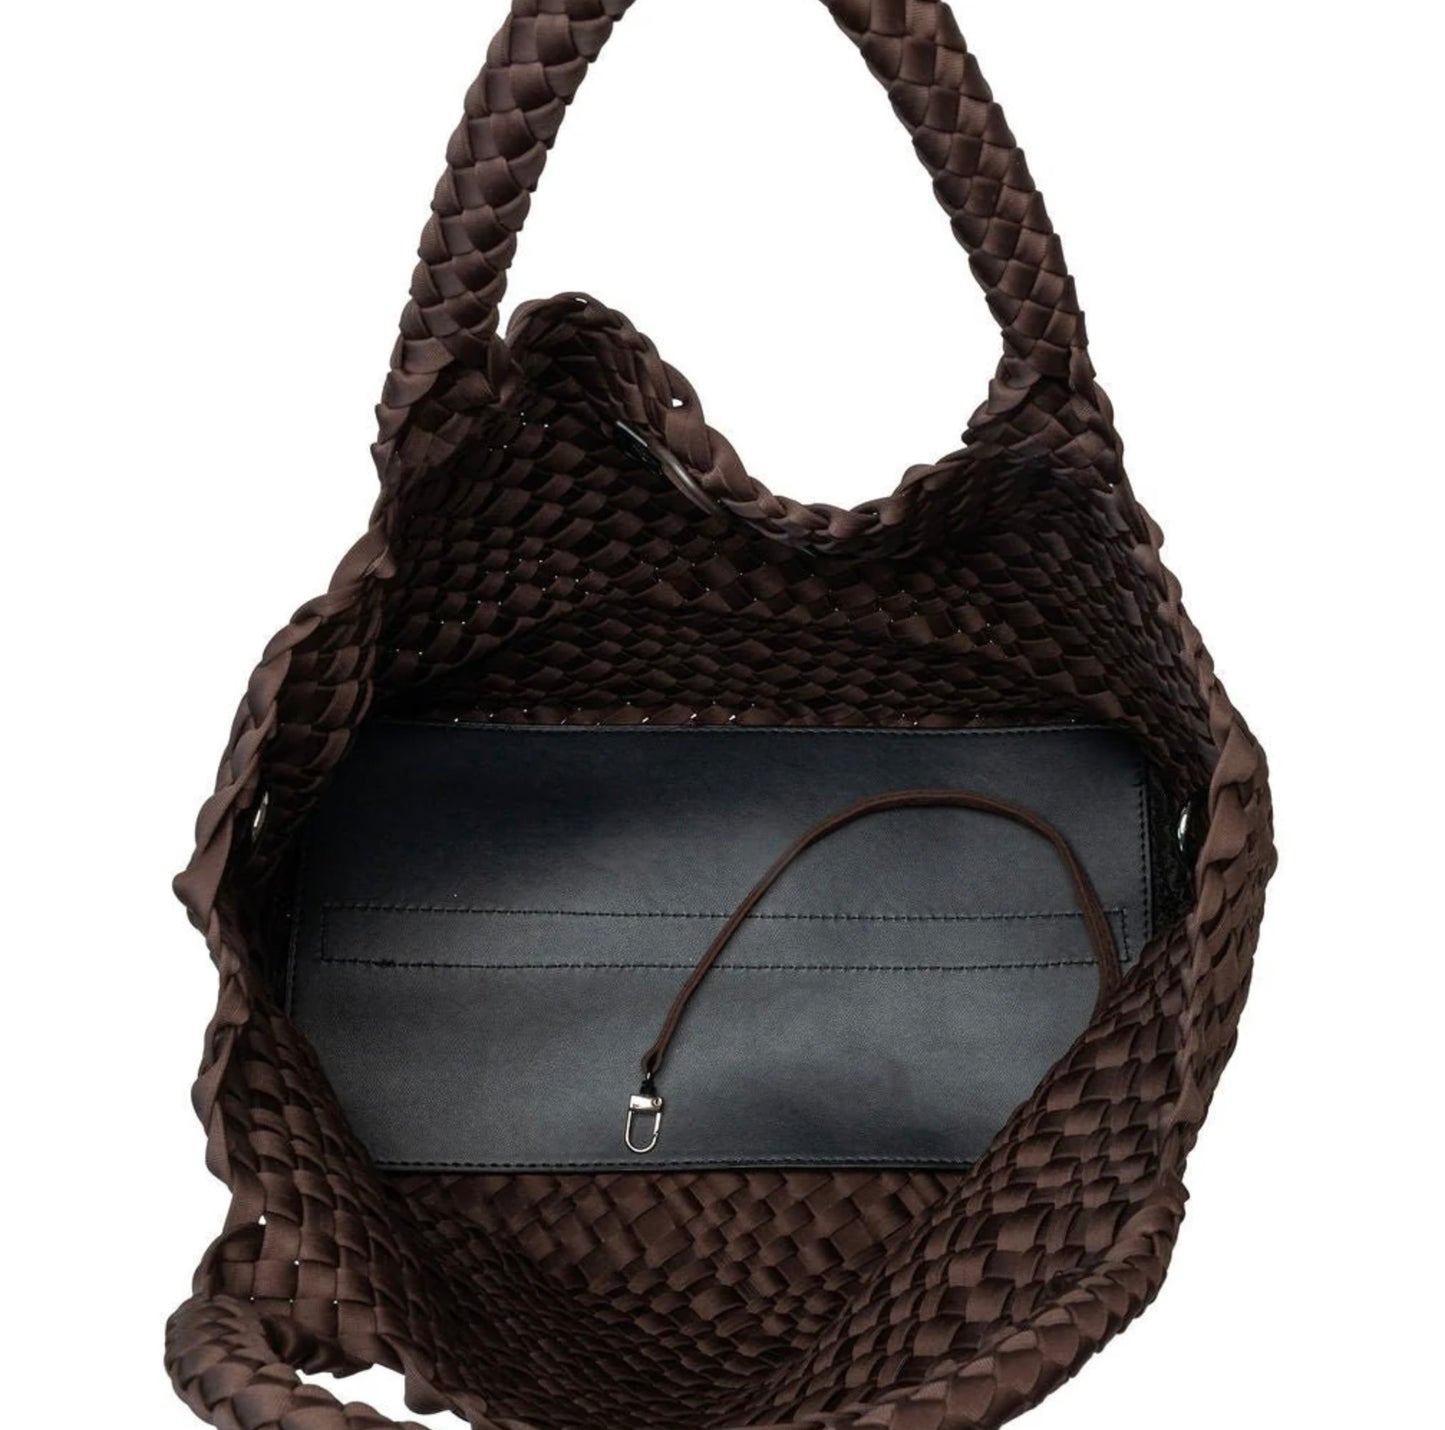 London Large Woven Bag With Matching Wristlet — Espresso